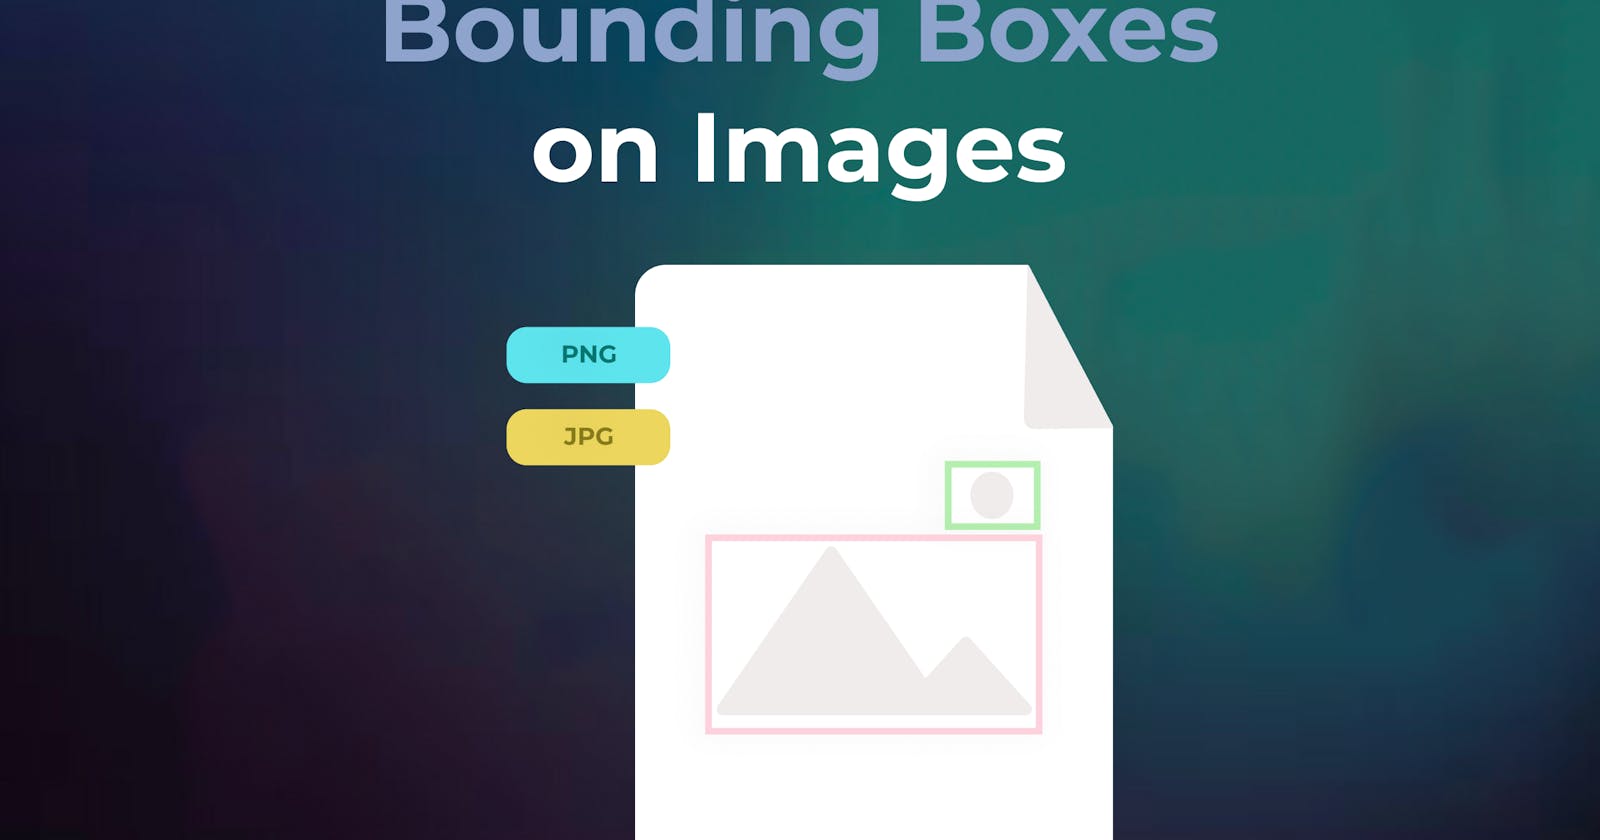 How to display Bounding Boxes on Images with JavaScript